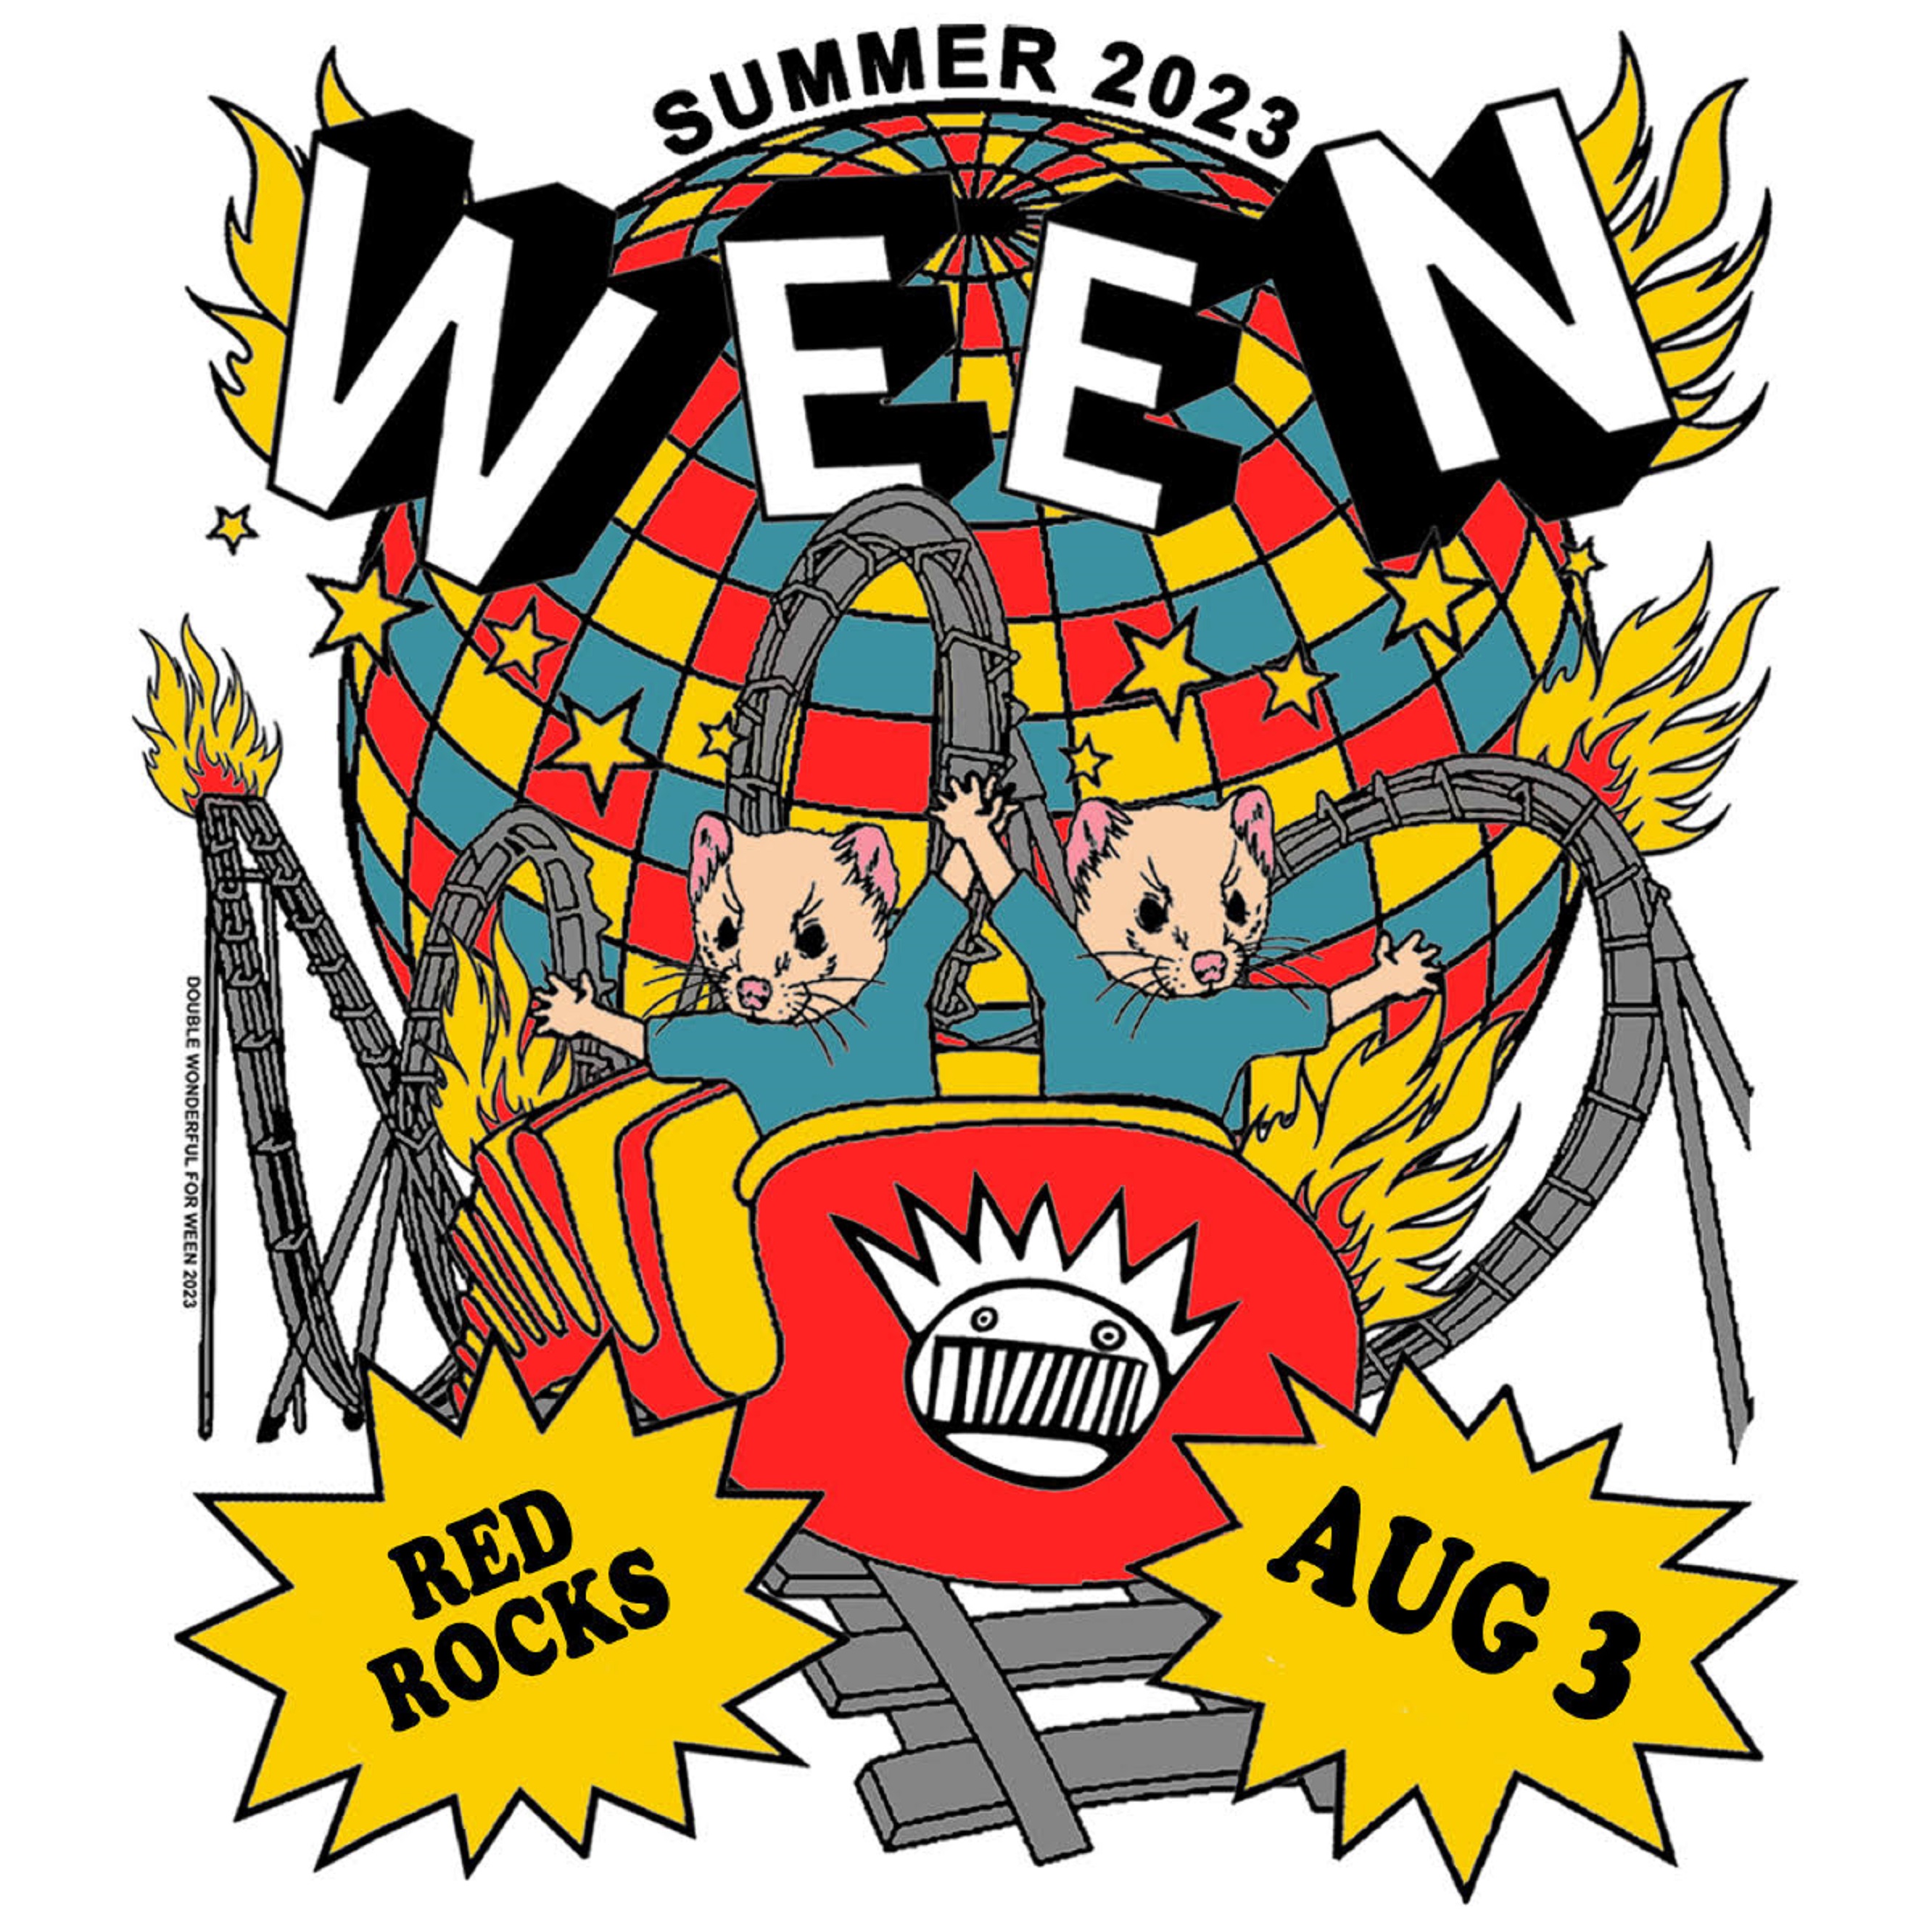 WEEN Live at Red Rocks Amphitheatre on Thursday, August 3, 2023. Doors 6:30pm || Show 7:30pm